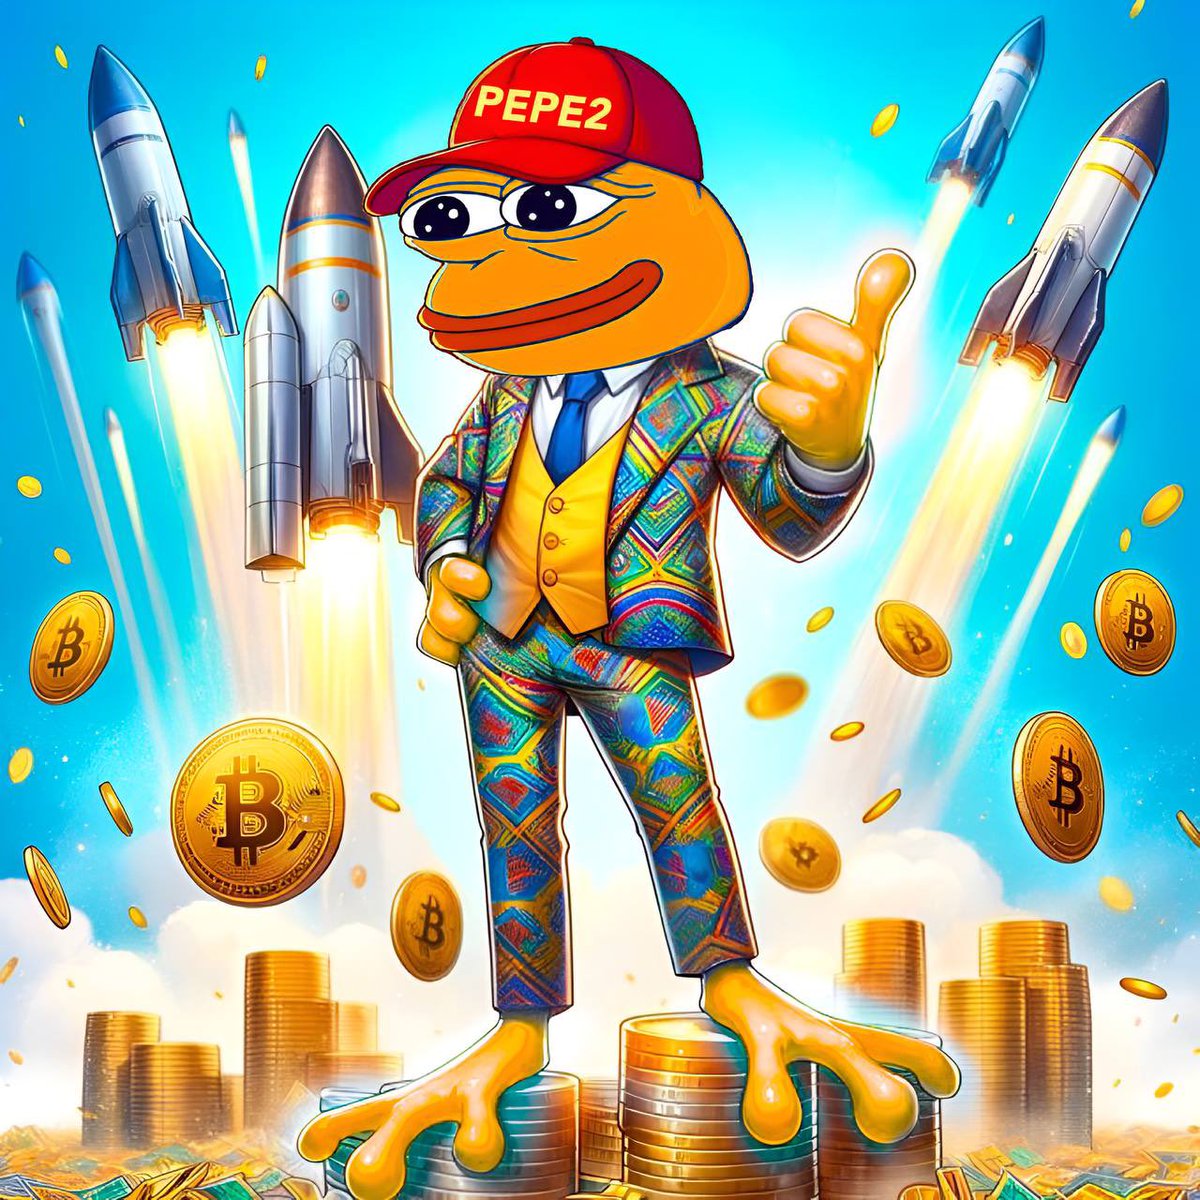 #Bitcoin halving in 3 days Only up from here - bulls always win $PEPE AND #PEPE2 will be the leader of meme coins Don’t miss your second chance